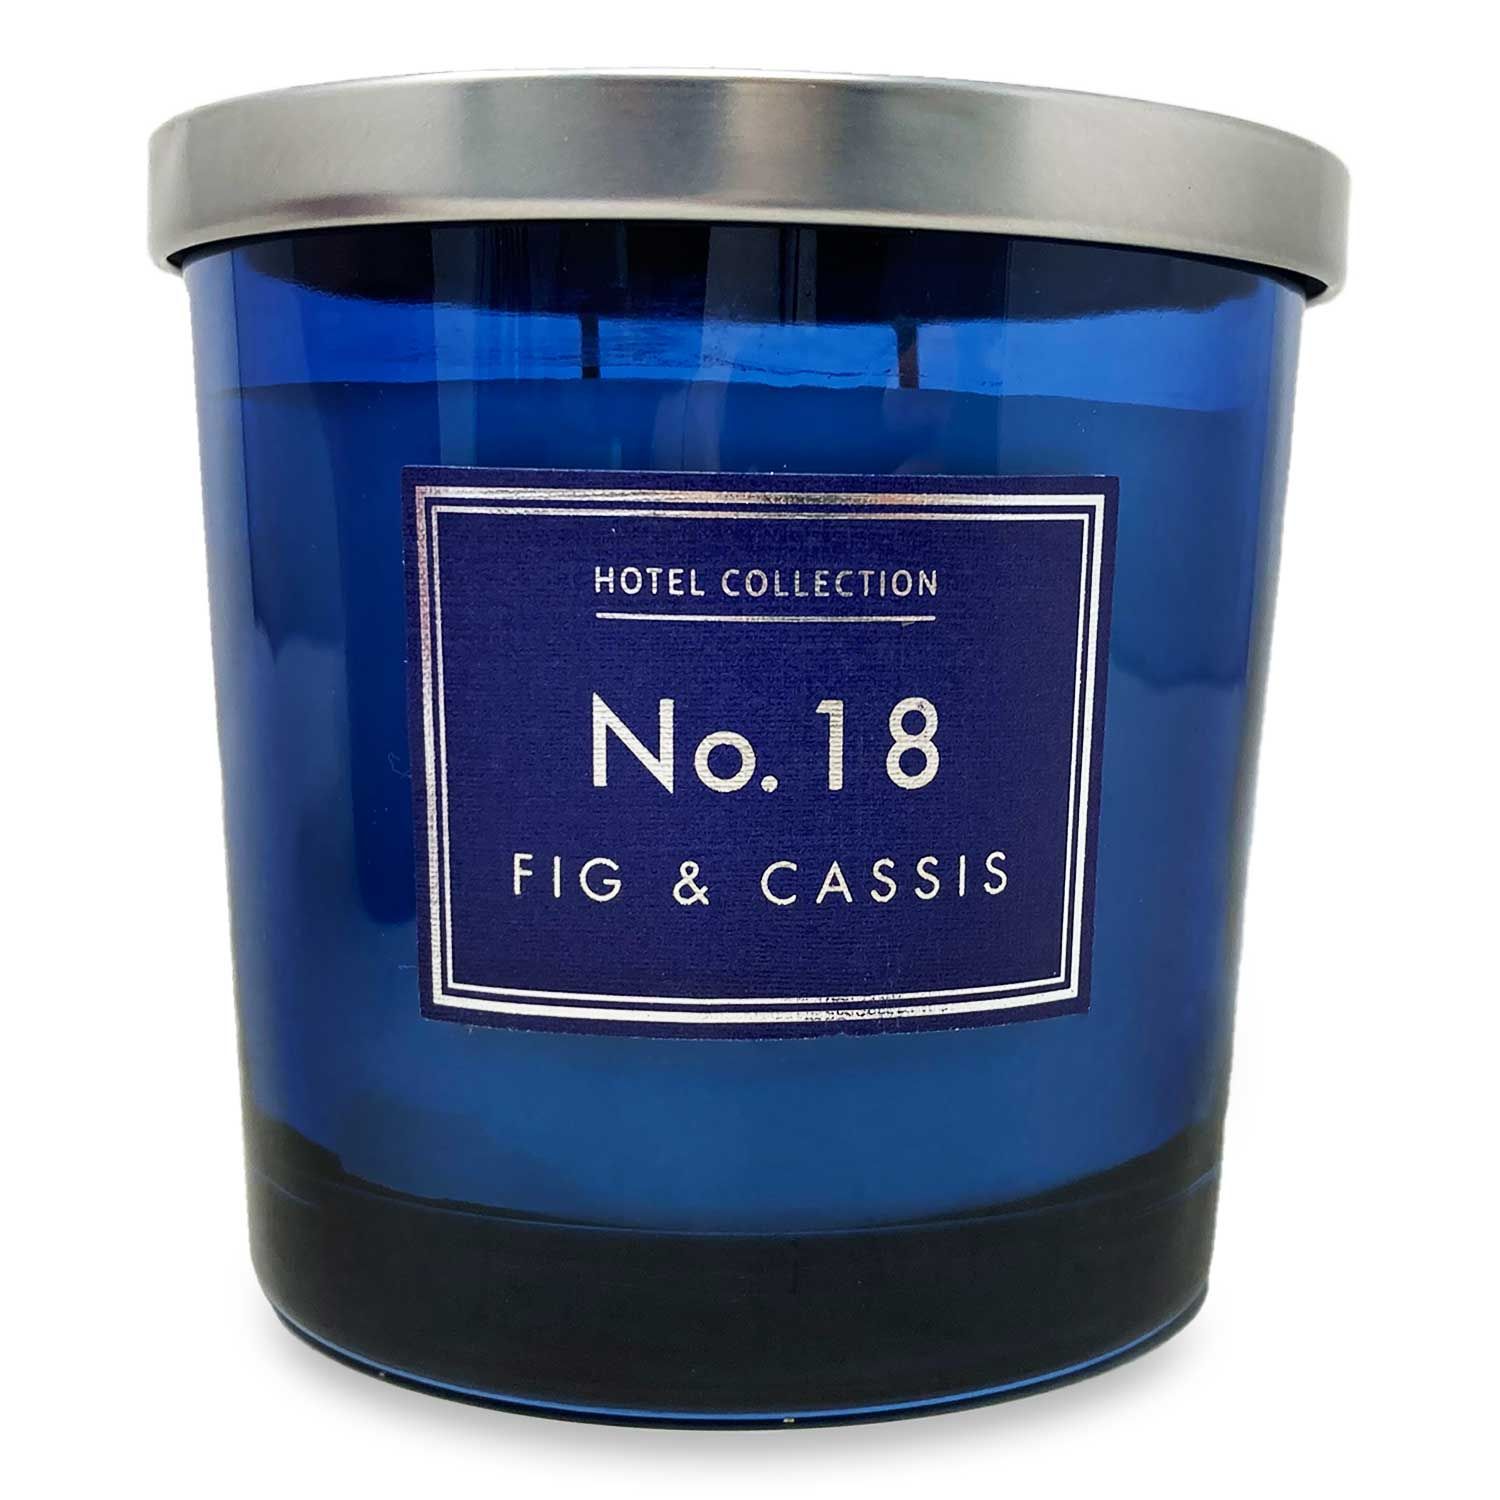 Hotel Collection No.18 Fig & Cassis Candle 335g RRP £3.49 CLEARANCE XL £2.99